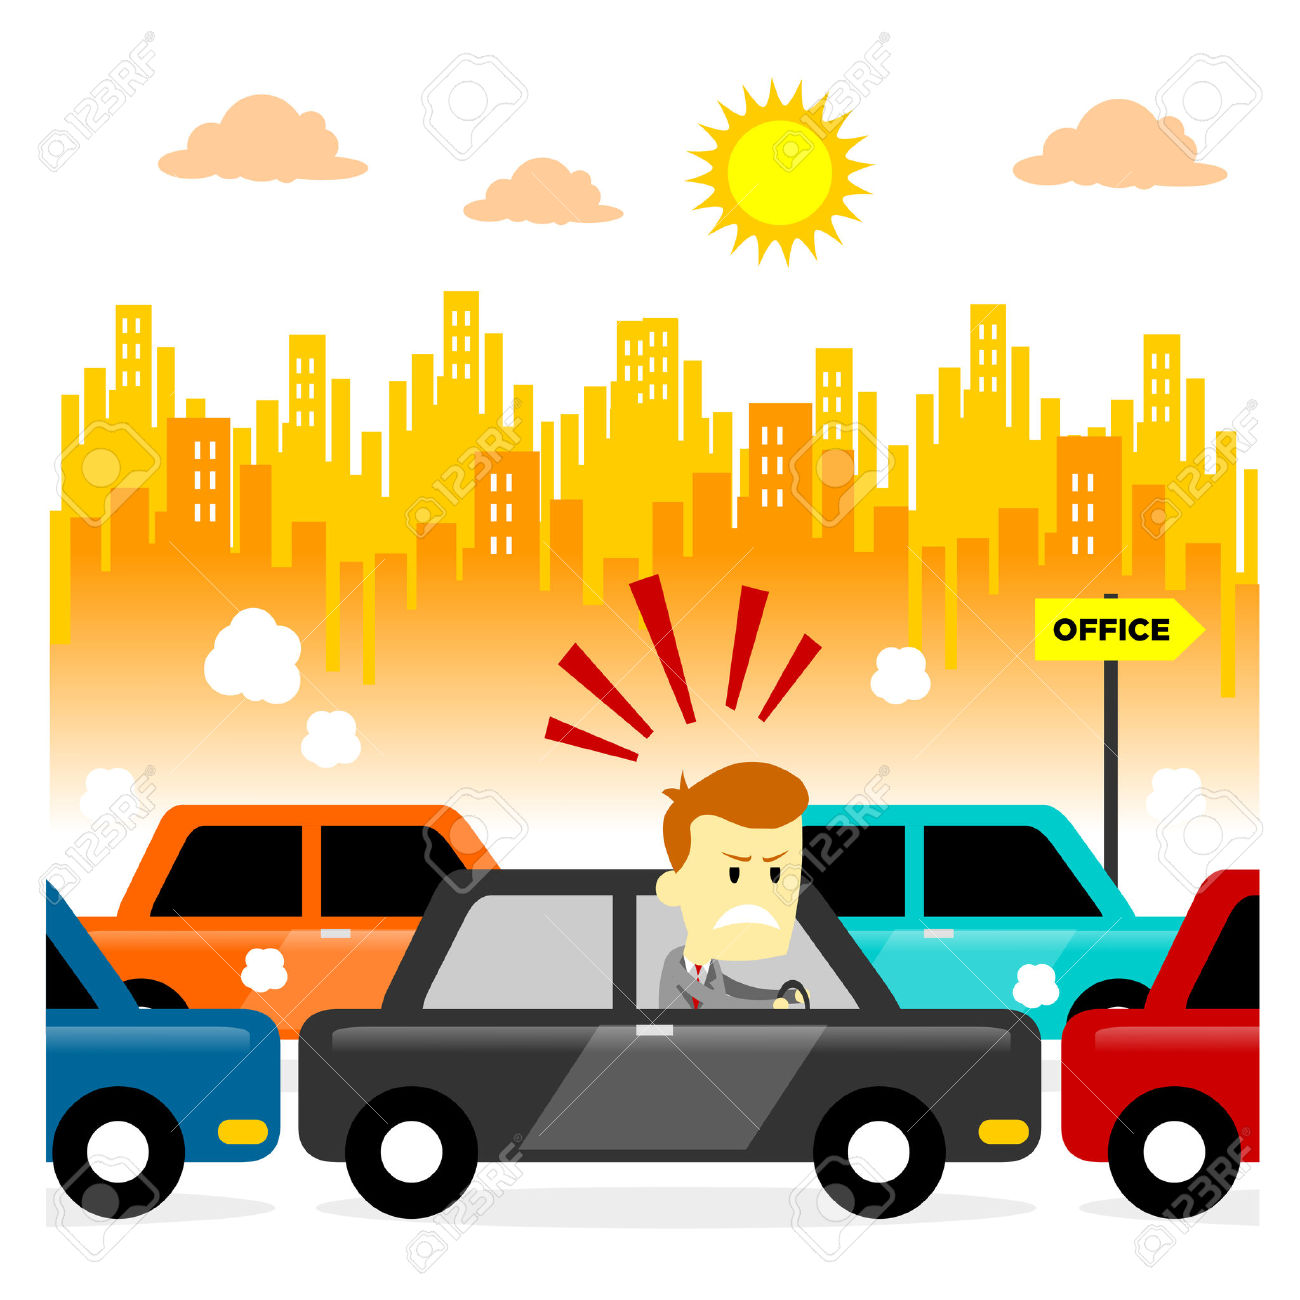 12,368 Traffic Style Stock Vector Illustration And Royalty Free.